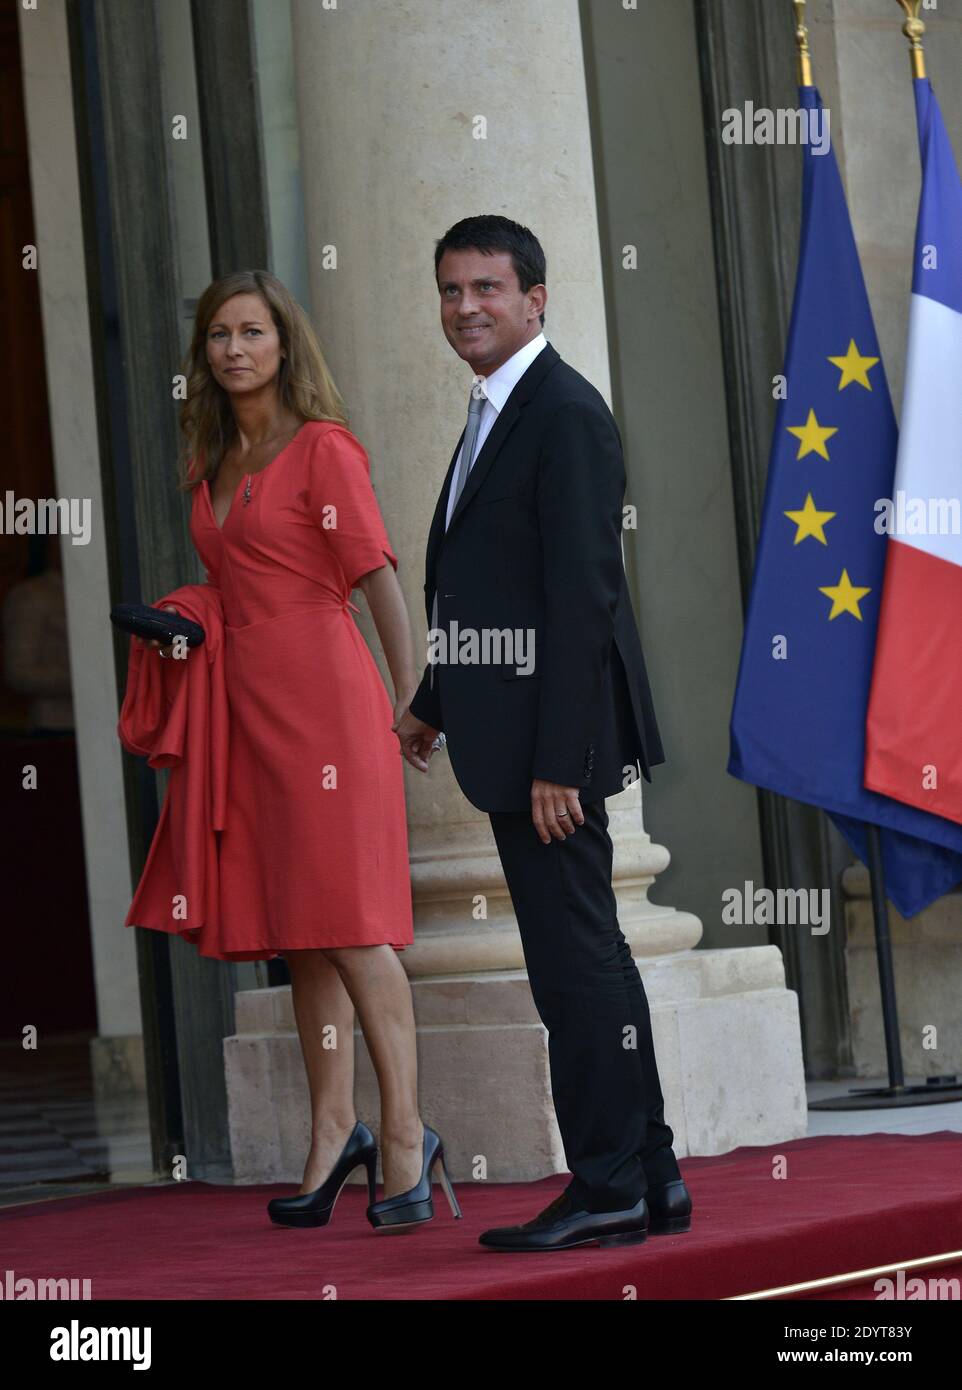 French Interior Minister Manuel Valls and his wife Anne Gravoin arriving at a state dinner for German President Joachim Gauck at the Elysee Palace on September 3, 2013 in Paris, France. Photo by Mousse/ABACAPRESS.COM Stock Photo